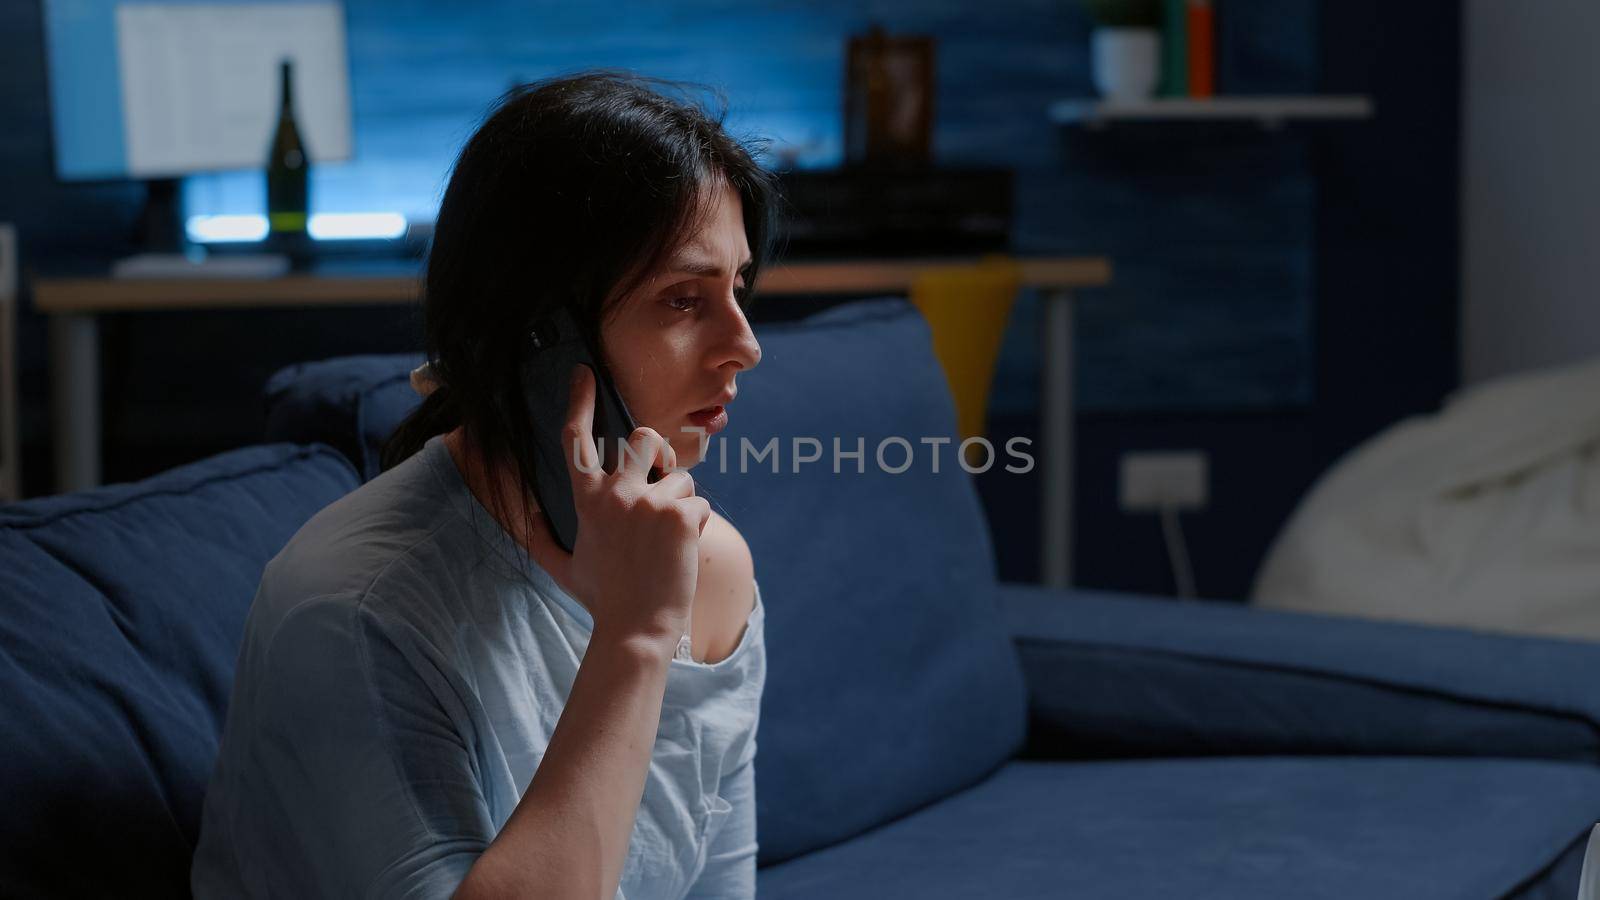 Depressed, scared, shocked, lonely woman dropping phone after hearing horible news, feeling emotionally unstable, traumatised. Person with anxiety suffering major depression because family lost